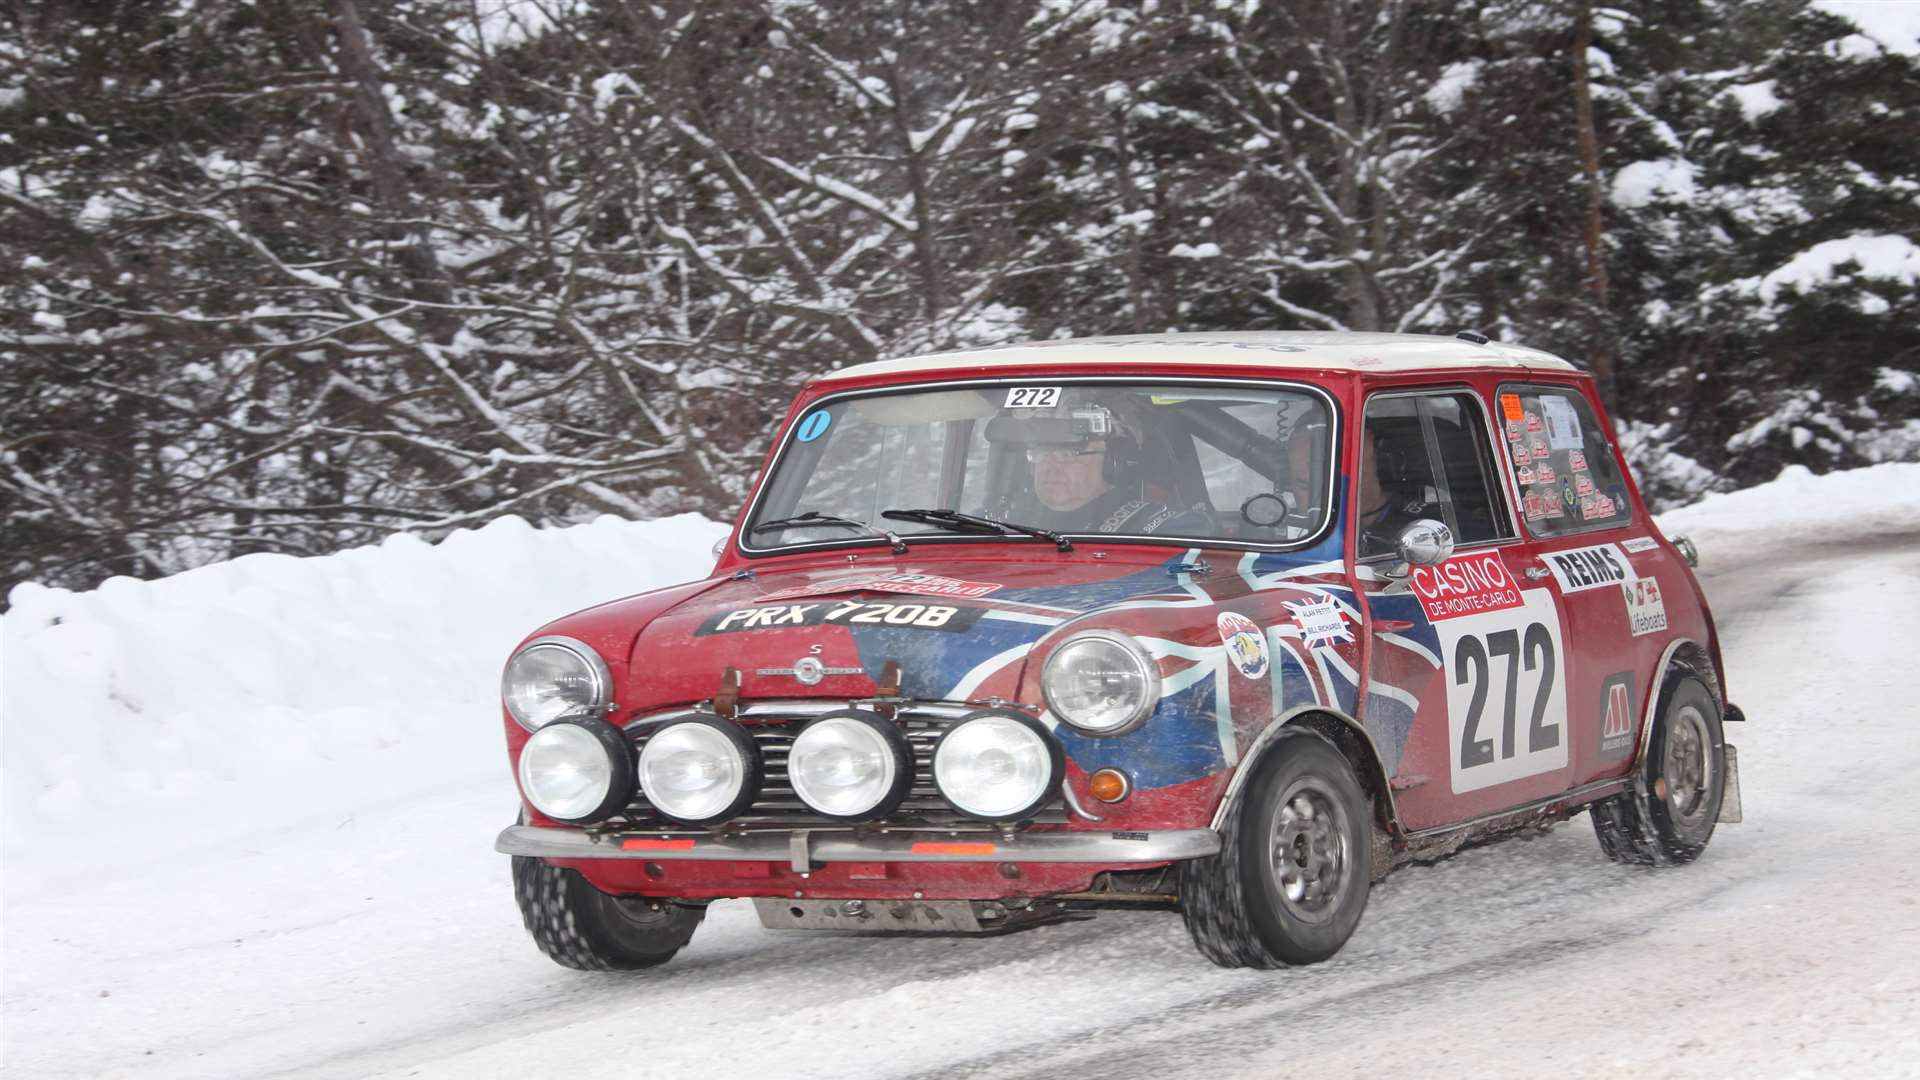 Bill Richards will tackle the Monte Carlo Historique Rally this week